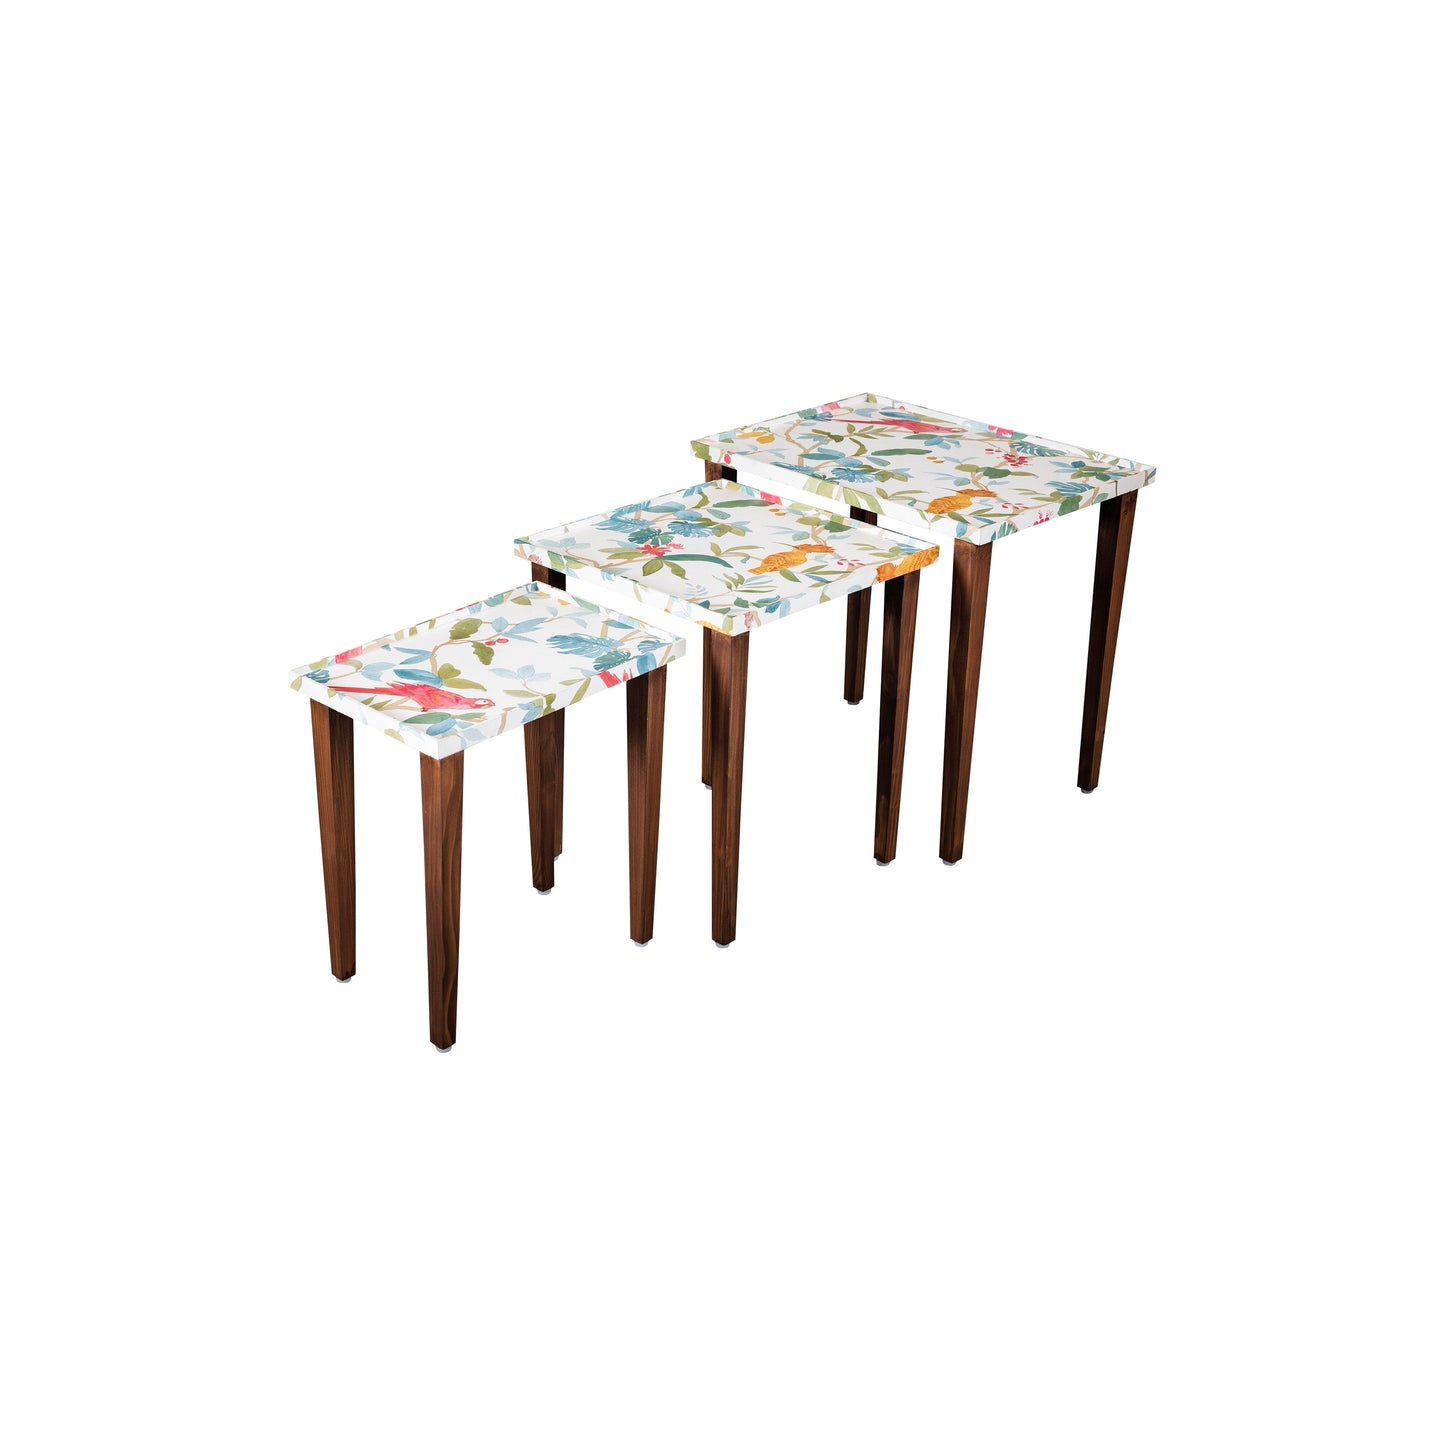 A Tiny Mistake Pakshi Wooden Rectangle Nesting Tables (Set of 3), Living Room Decor